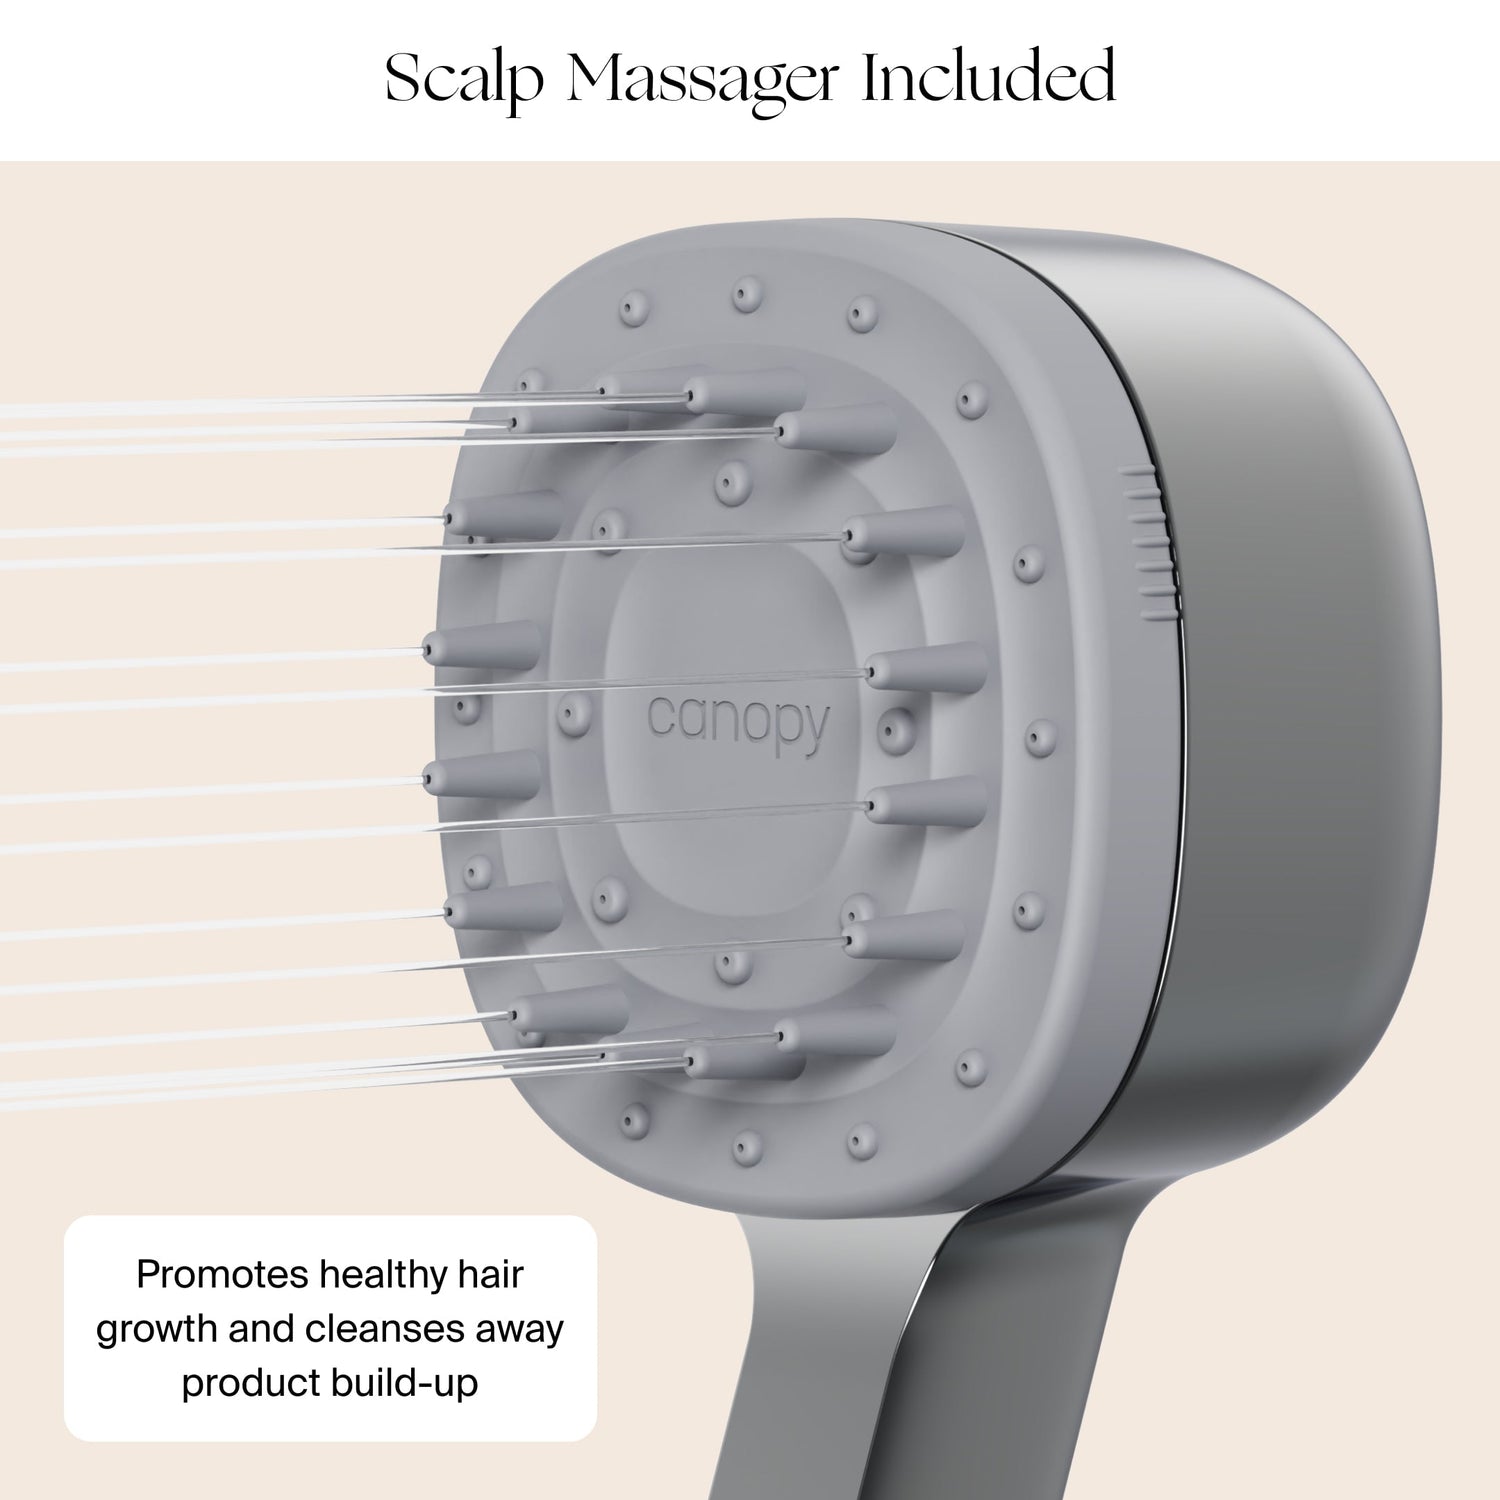 Handheld Filtered Showerhead | Lifestyle,  Scalp Massager Included